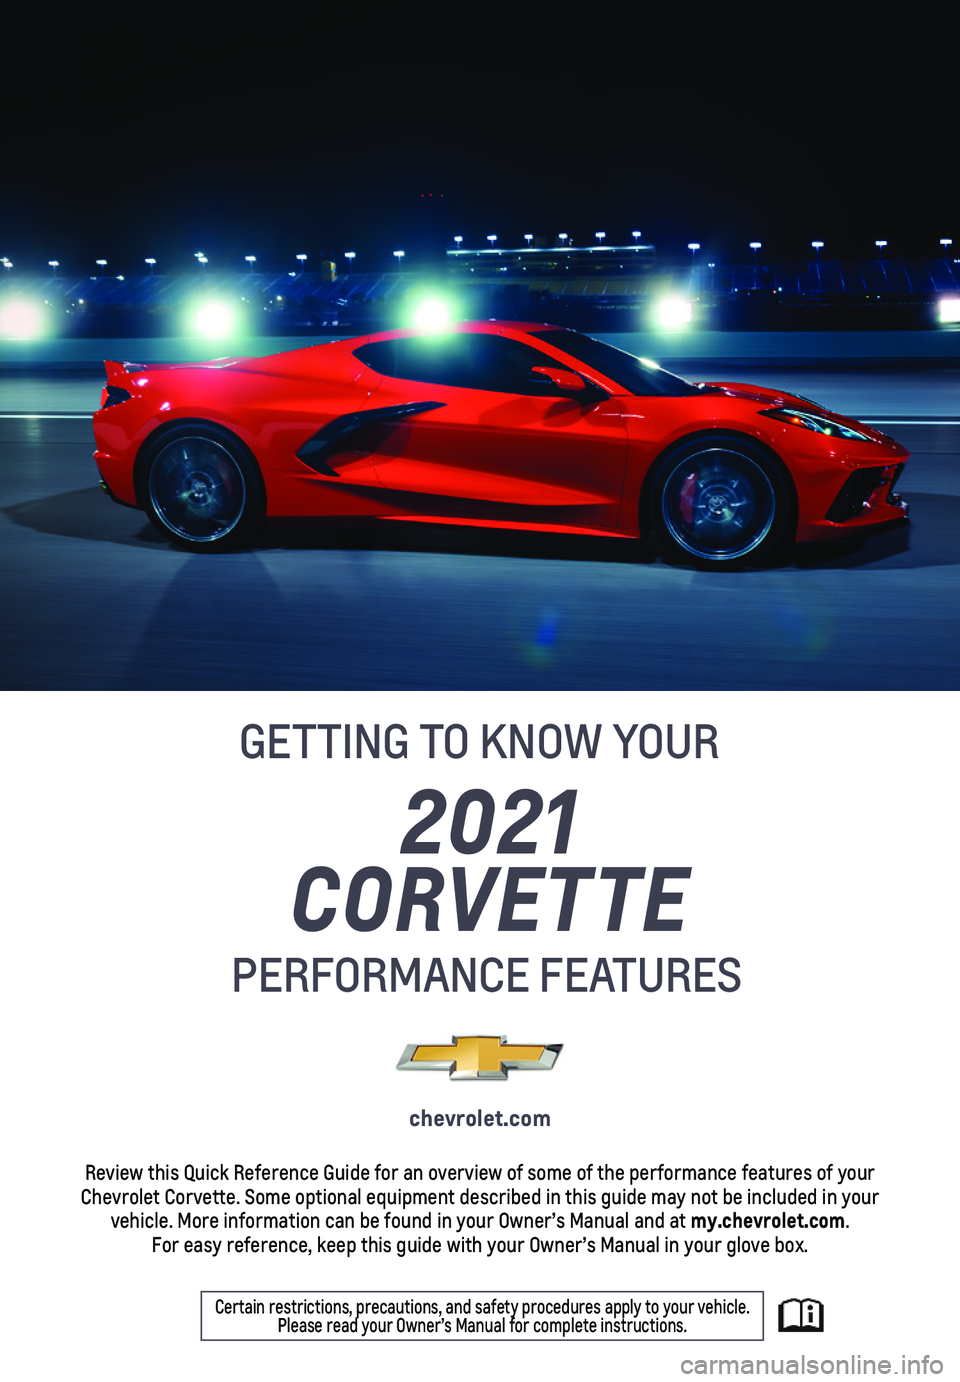 CHEVROLET CORVETTE 2021  Performance Get To Know Guide 2021 
CORVETTE
PERFORMANCE FEATURES
GETTING TO KNOW YOUR
chevrolet.com
Review this Quick Reference Guide for an overview of some of the perform\
ance features of your Chevrolet Corvette. Some optional